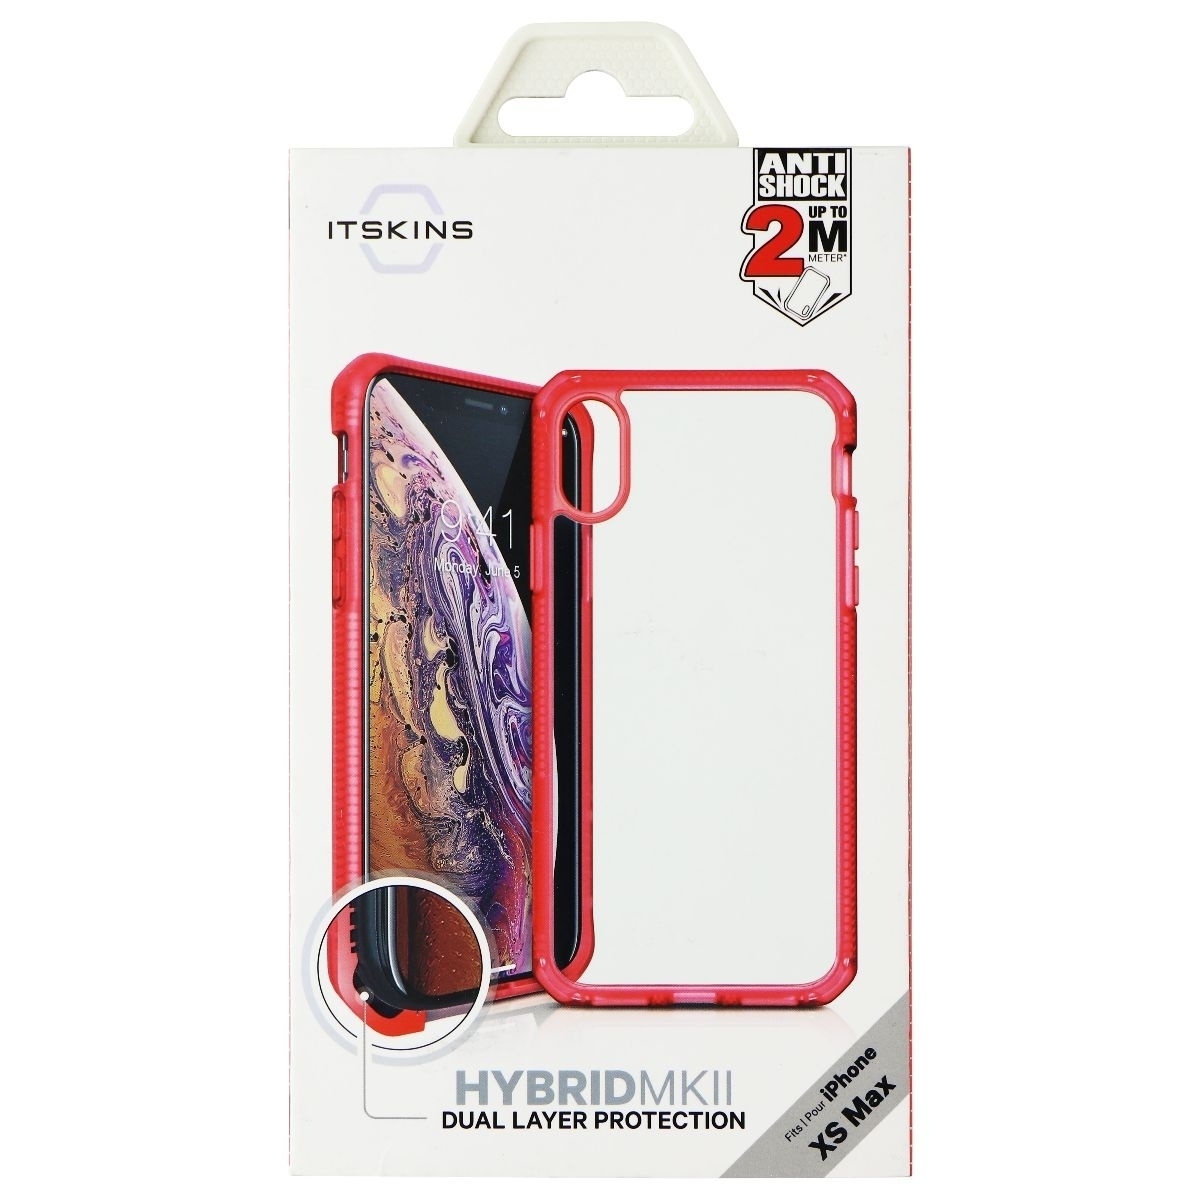 ITSKINS Hybrid Frost Phone Case For Apple IPhone Xs Max - Red And Transparent